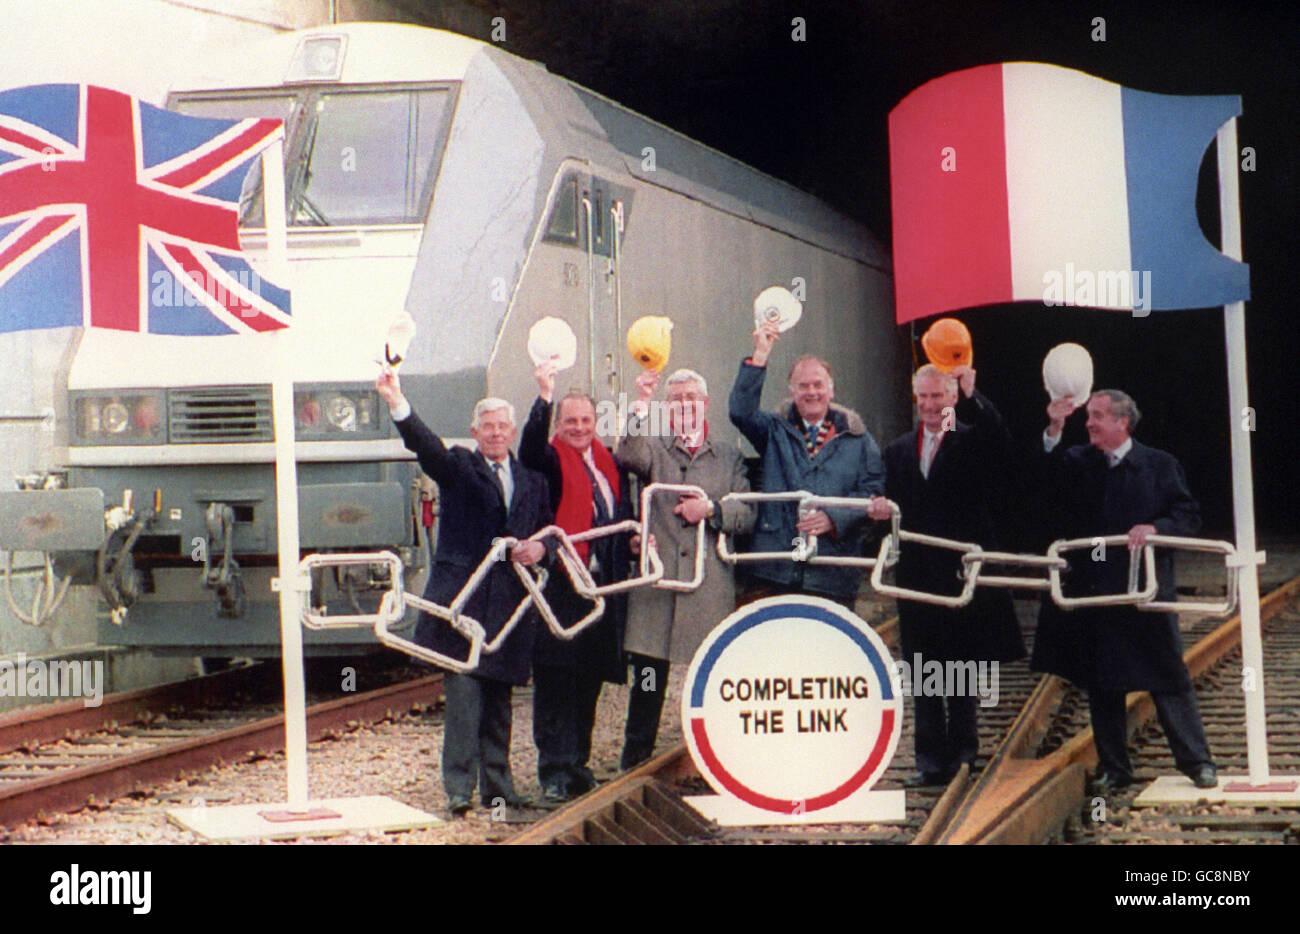 UK contractors of transmanche-link, the anglo-french consortium which built the channel tunnel, hand over the project to eurotunnel, at entrance in folkestone l-r Peter Costain, Tony Palmer, Neville Simms, sir Alastair Morton, Joe Dwyer and and sir Robert Davidson. Stock Photo